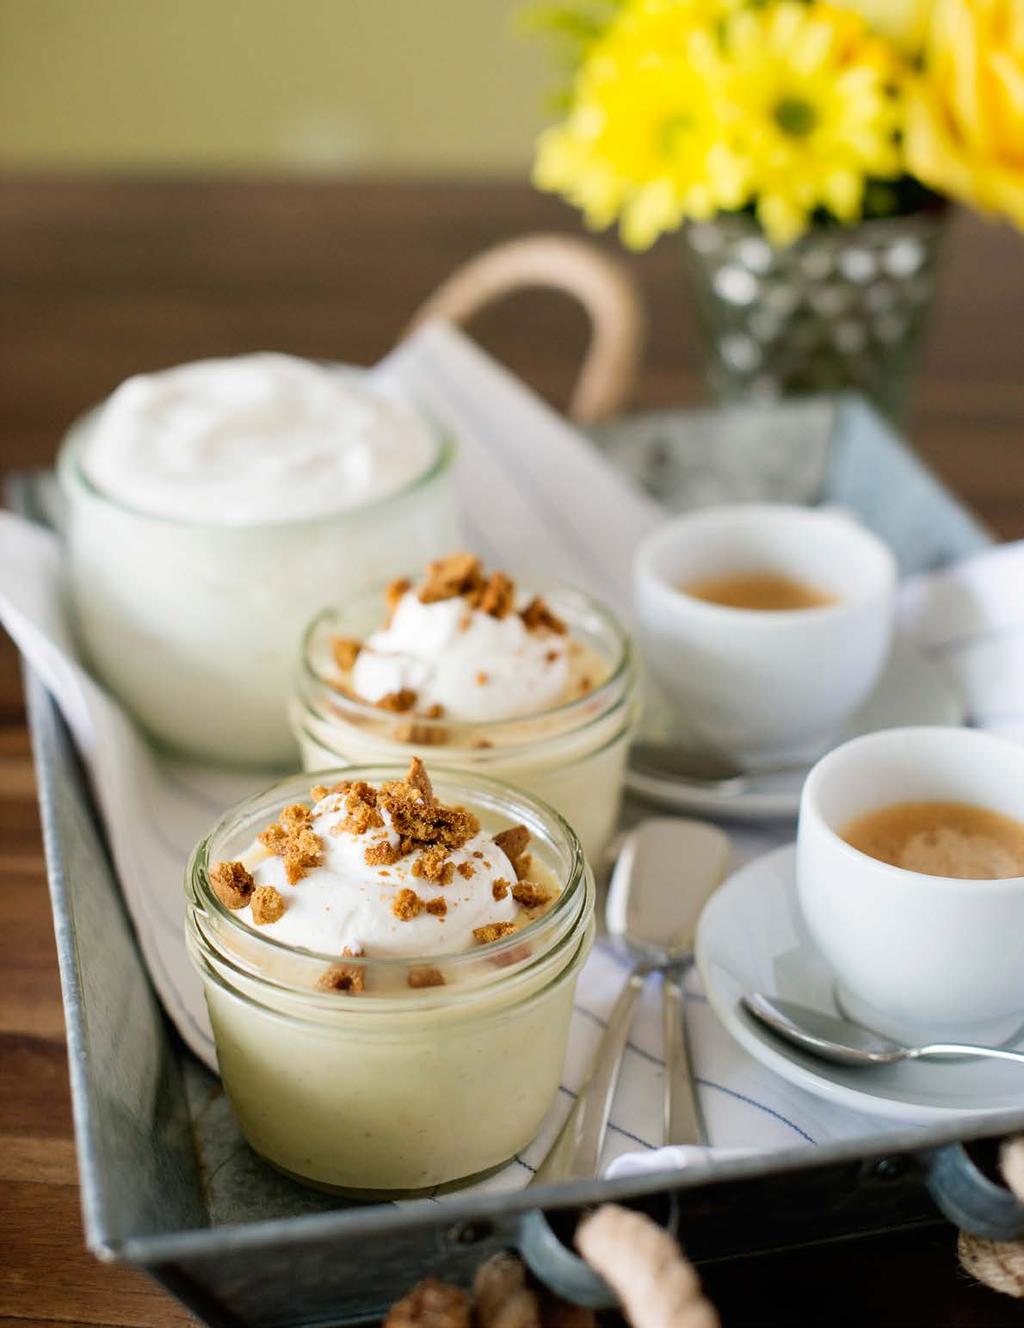 Butterscoth Pudding with Bourbon Whipped Cream Oh baby, this pudding is super smooth and creamy.